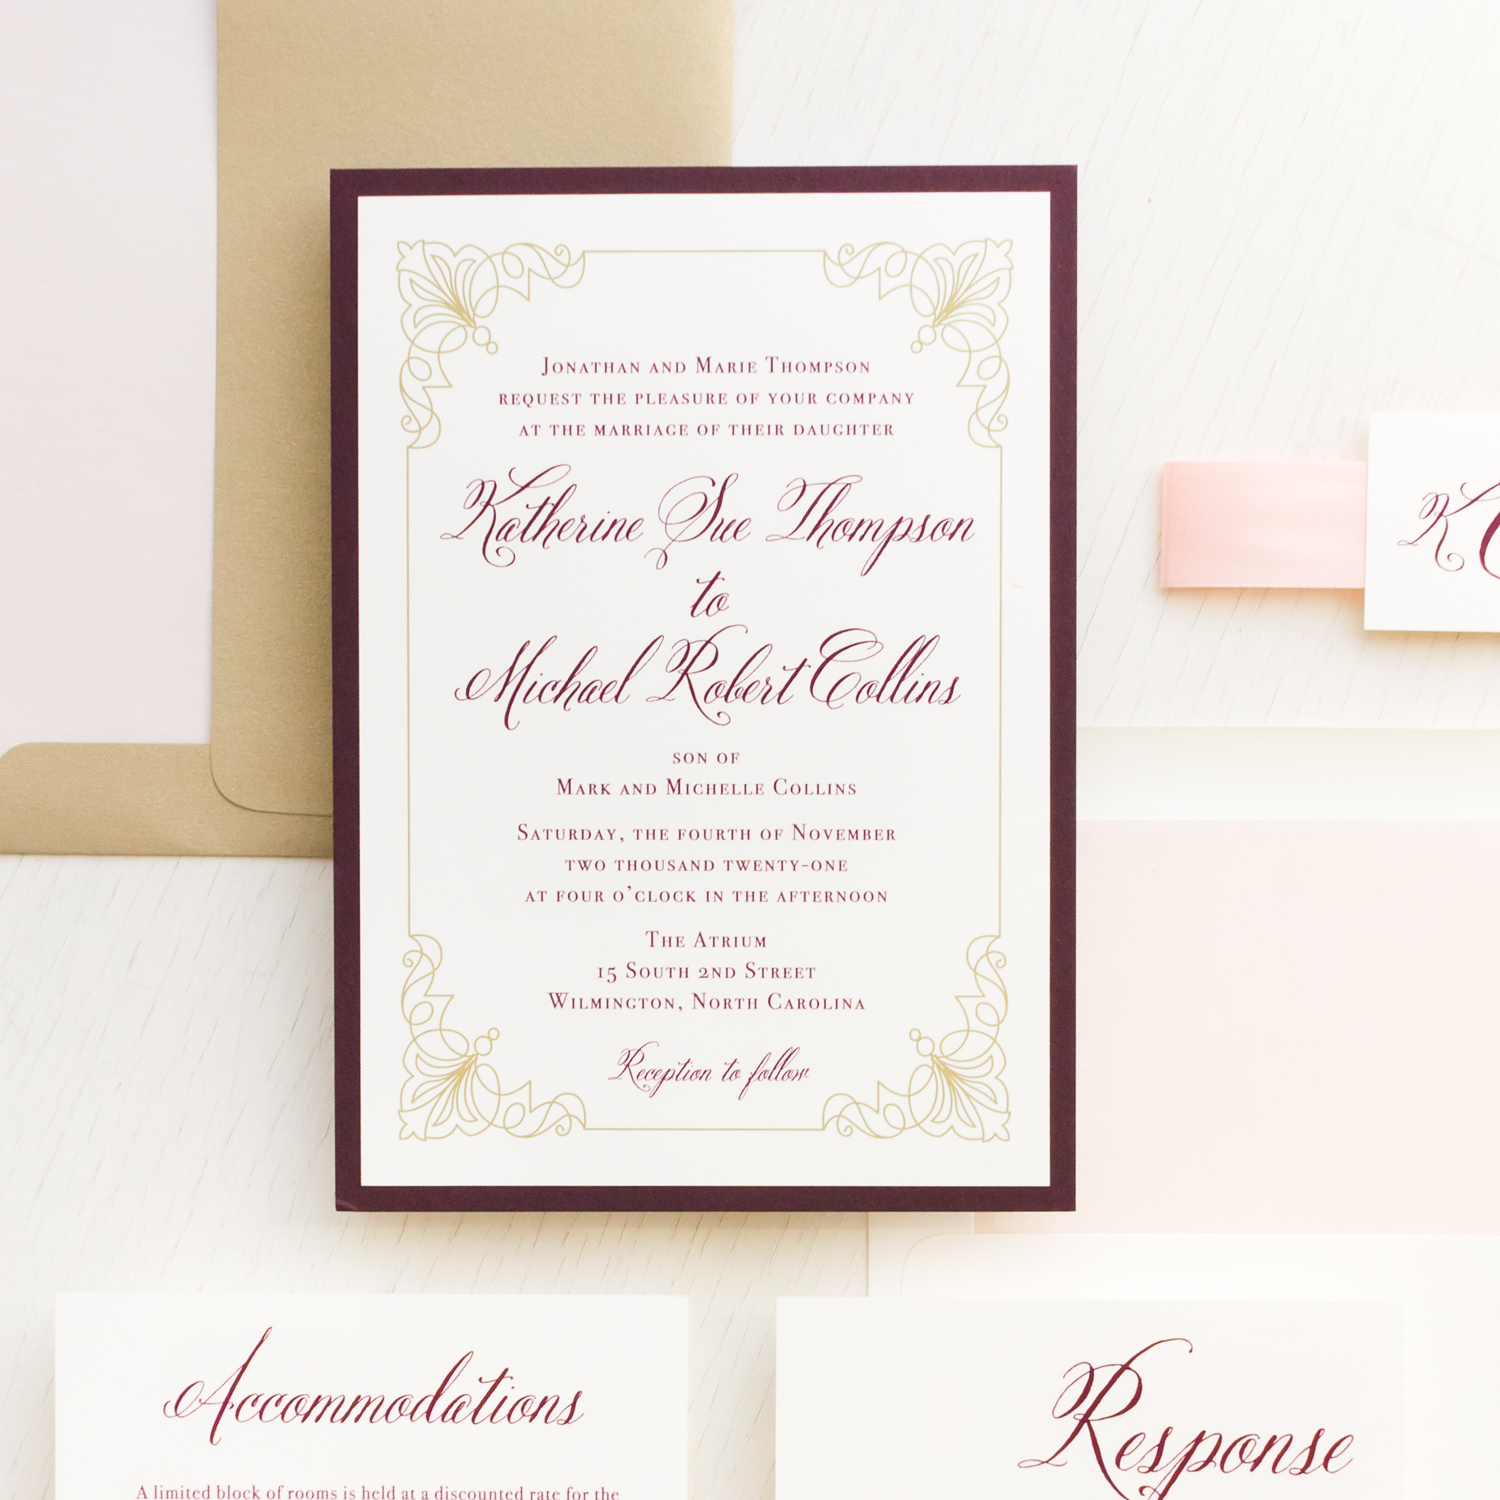 Stamped Paper Co.  Elegant Invitations for Weddings and Special Occasions